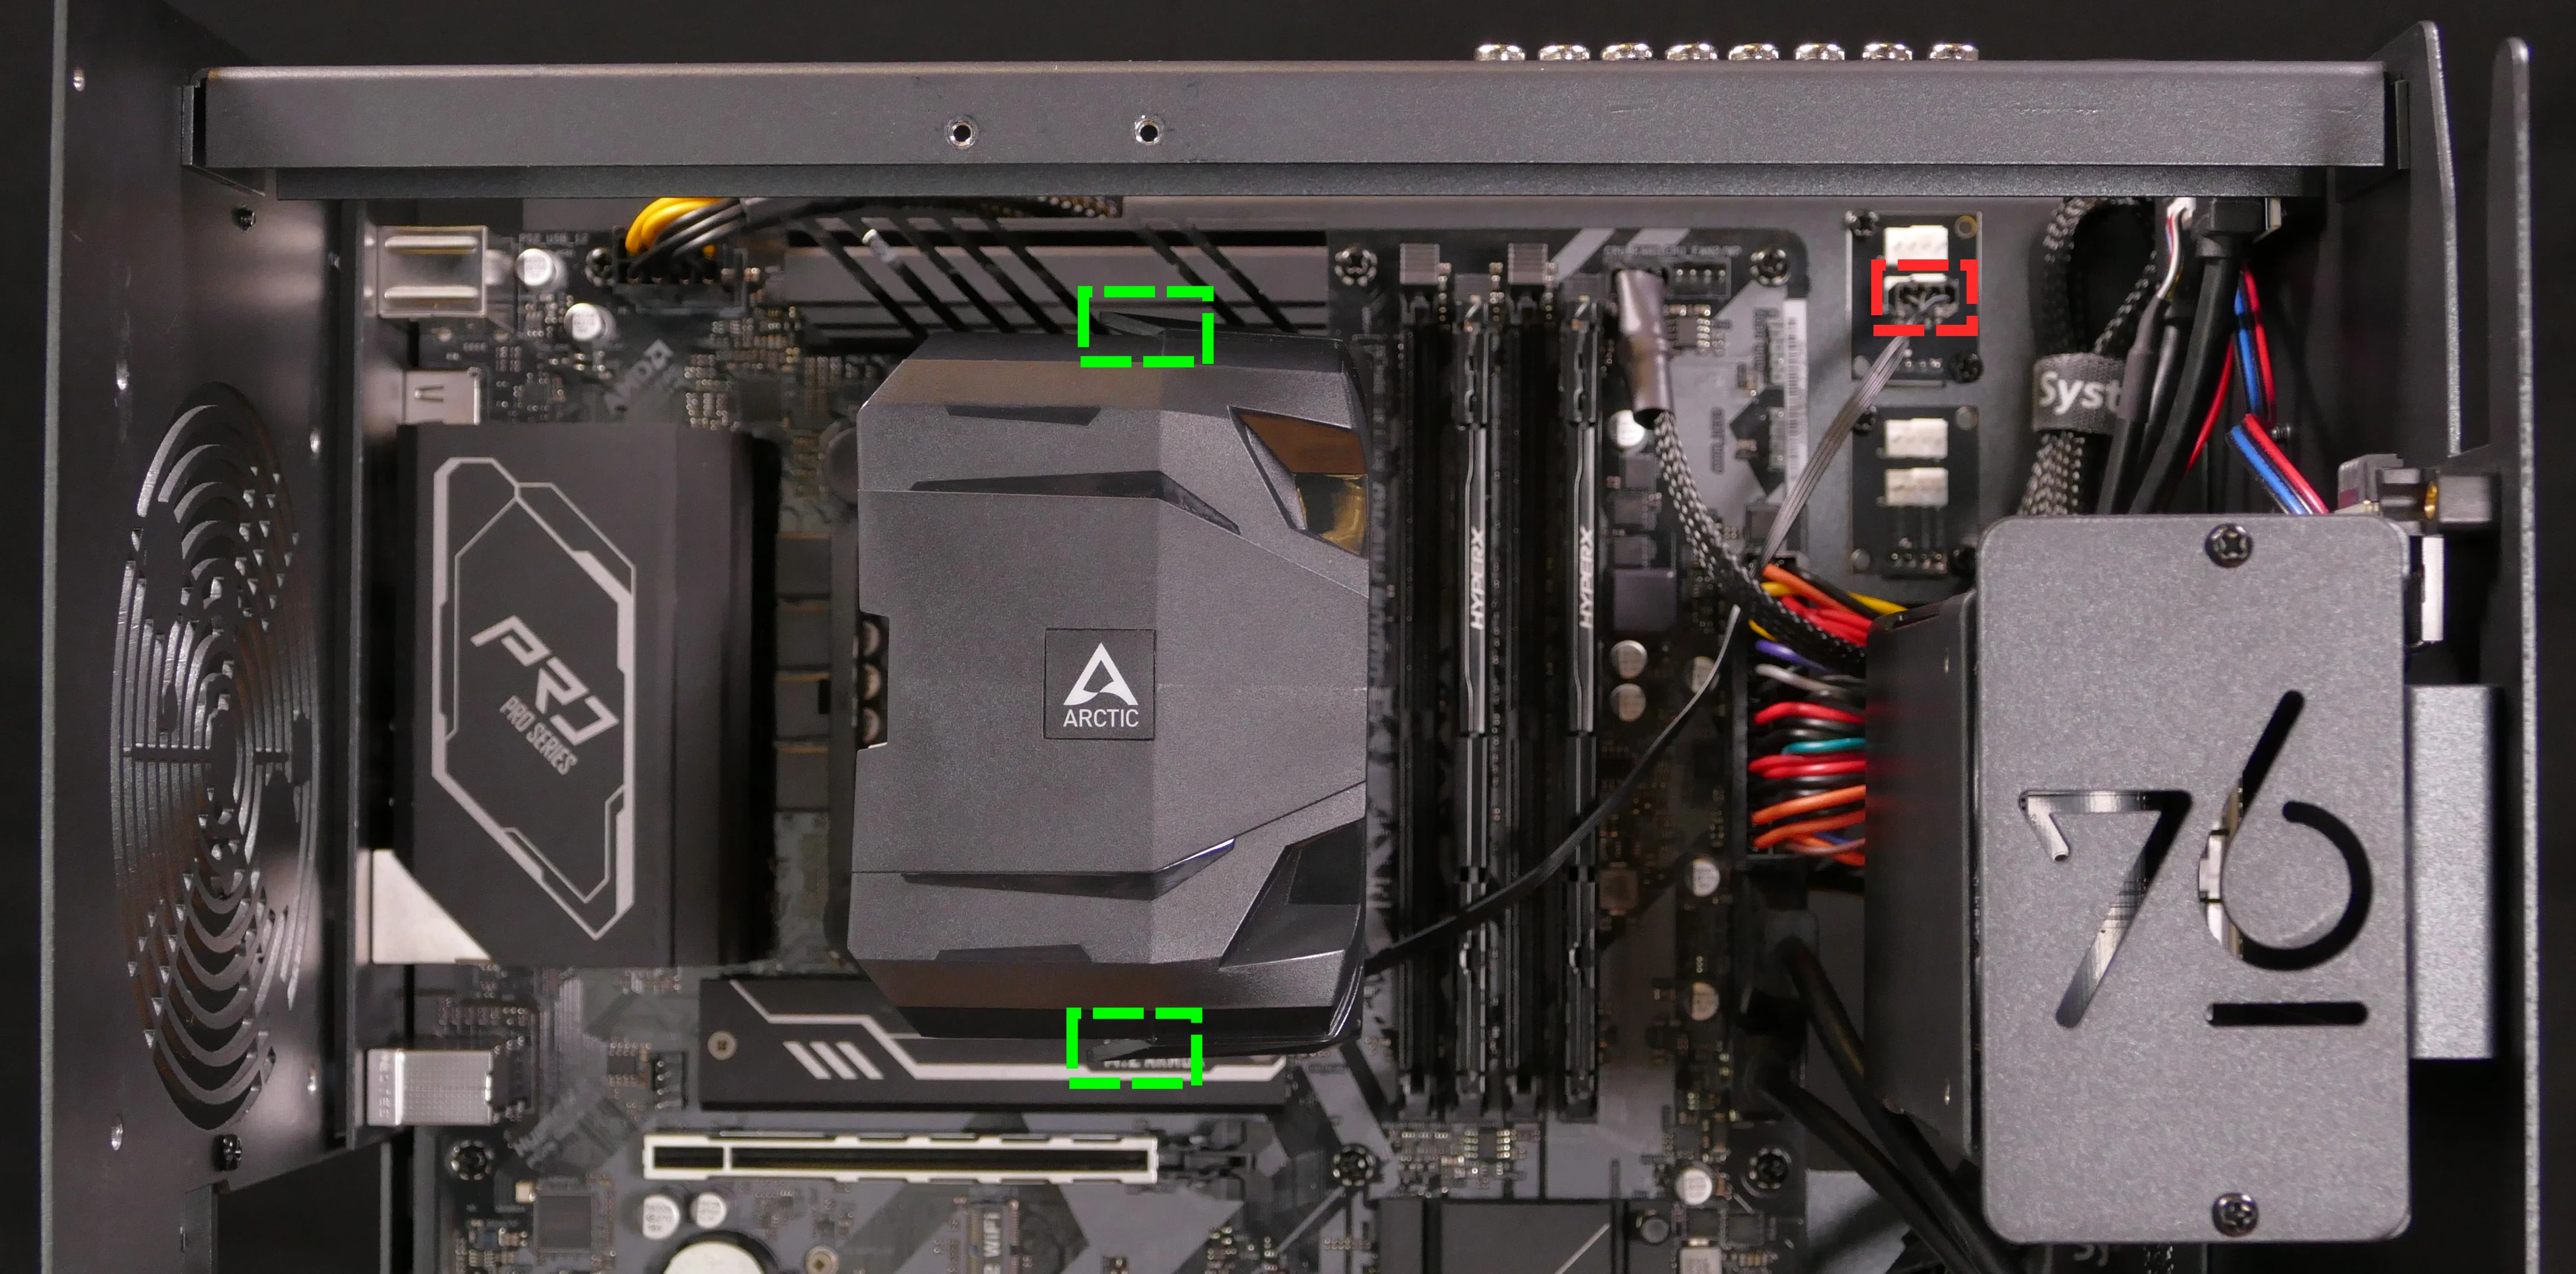 CPU heatsink fan clips and connector